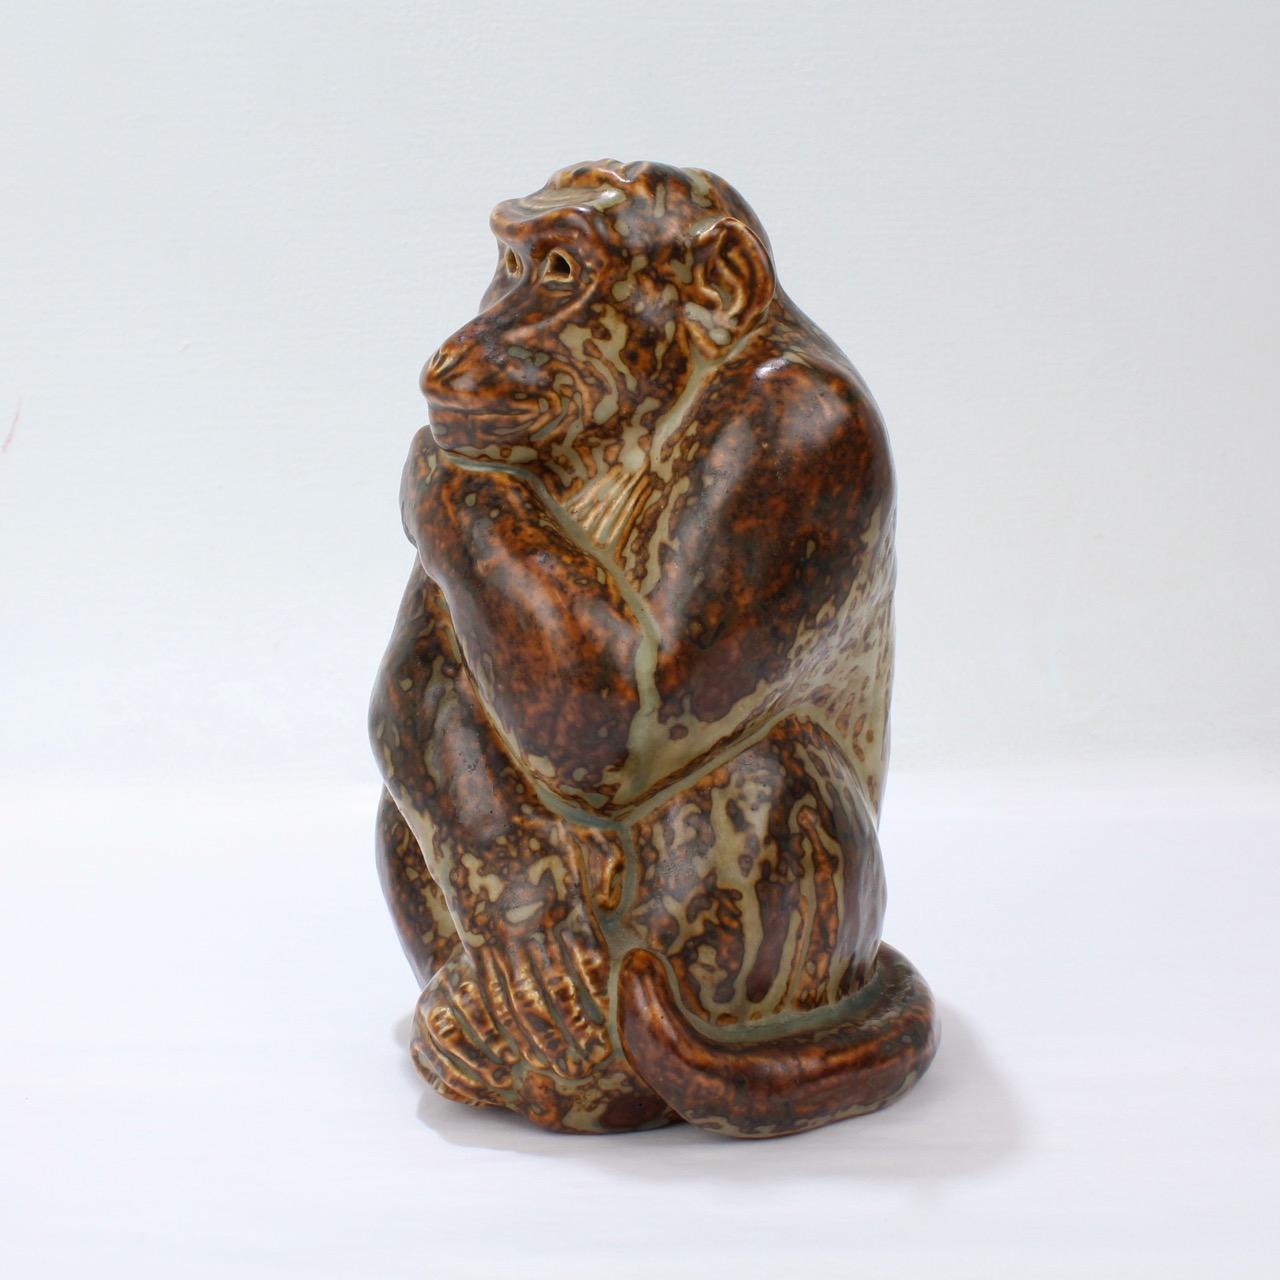 A wonderful stoneware pottery model of a Monkey designed by Knud Khyn for Royal Copenhagen.

Knud Khyn (1880-1969) was a Danish sculptor and painter. He was an important, long-term collaborator with Royal Copenhagen, designing some of the